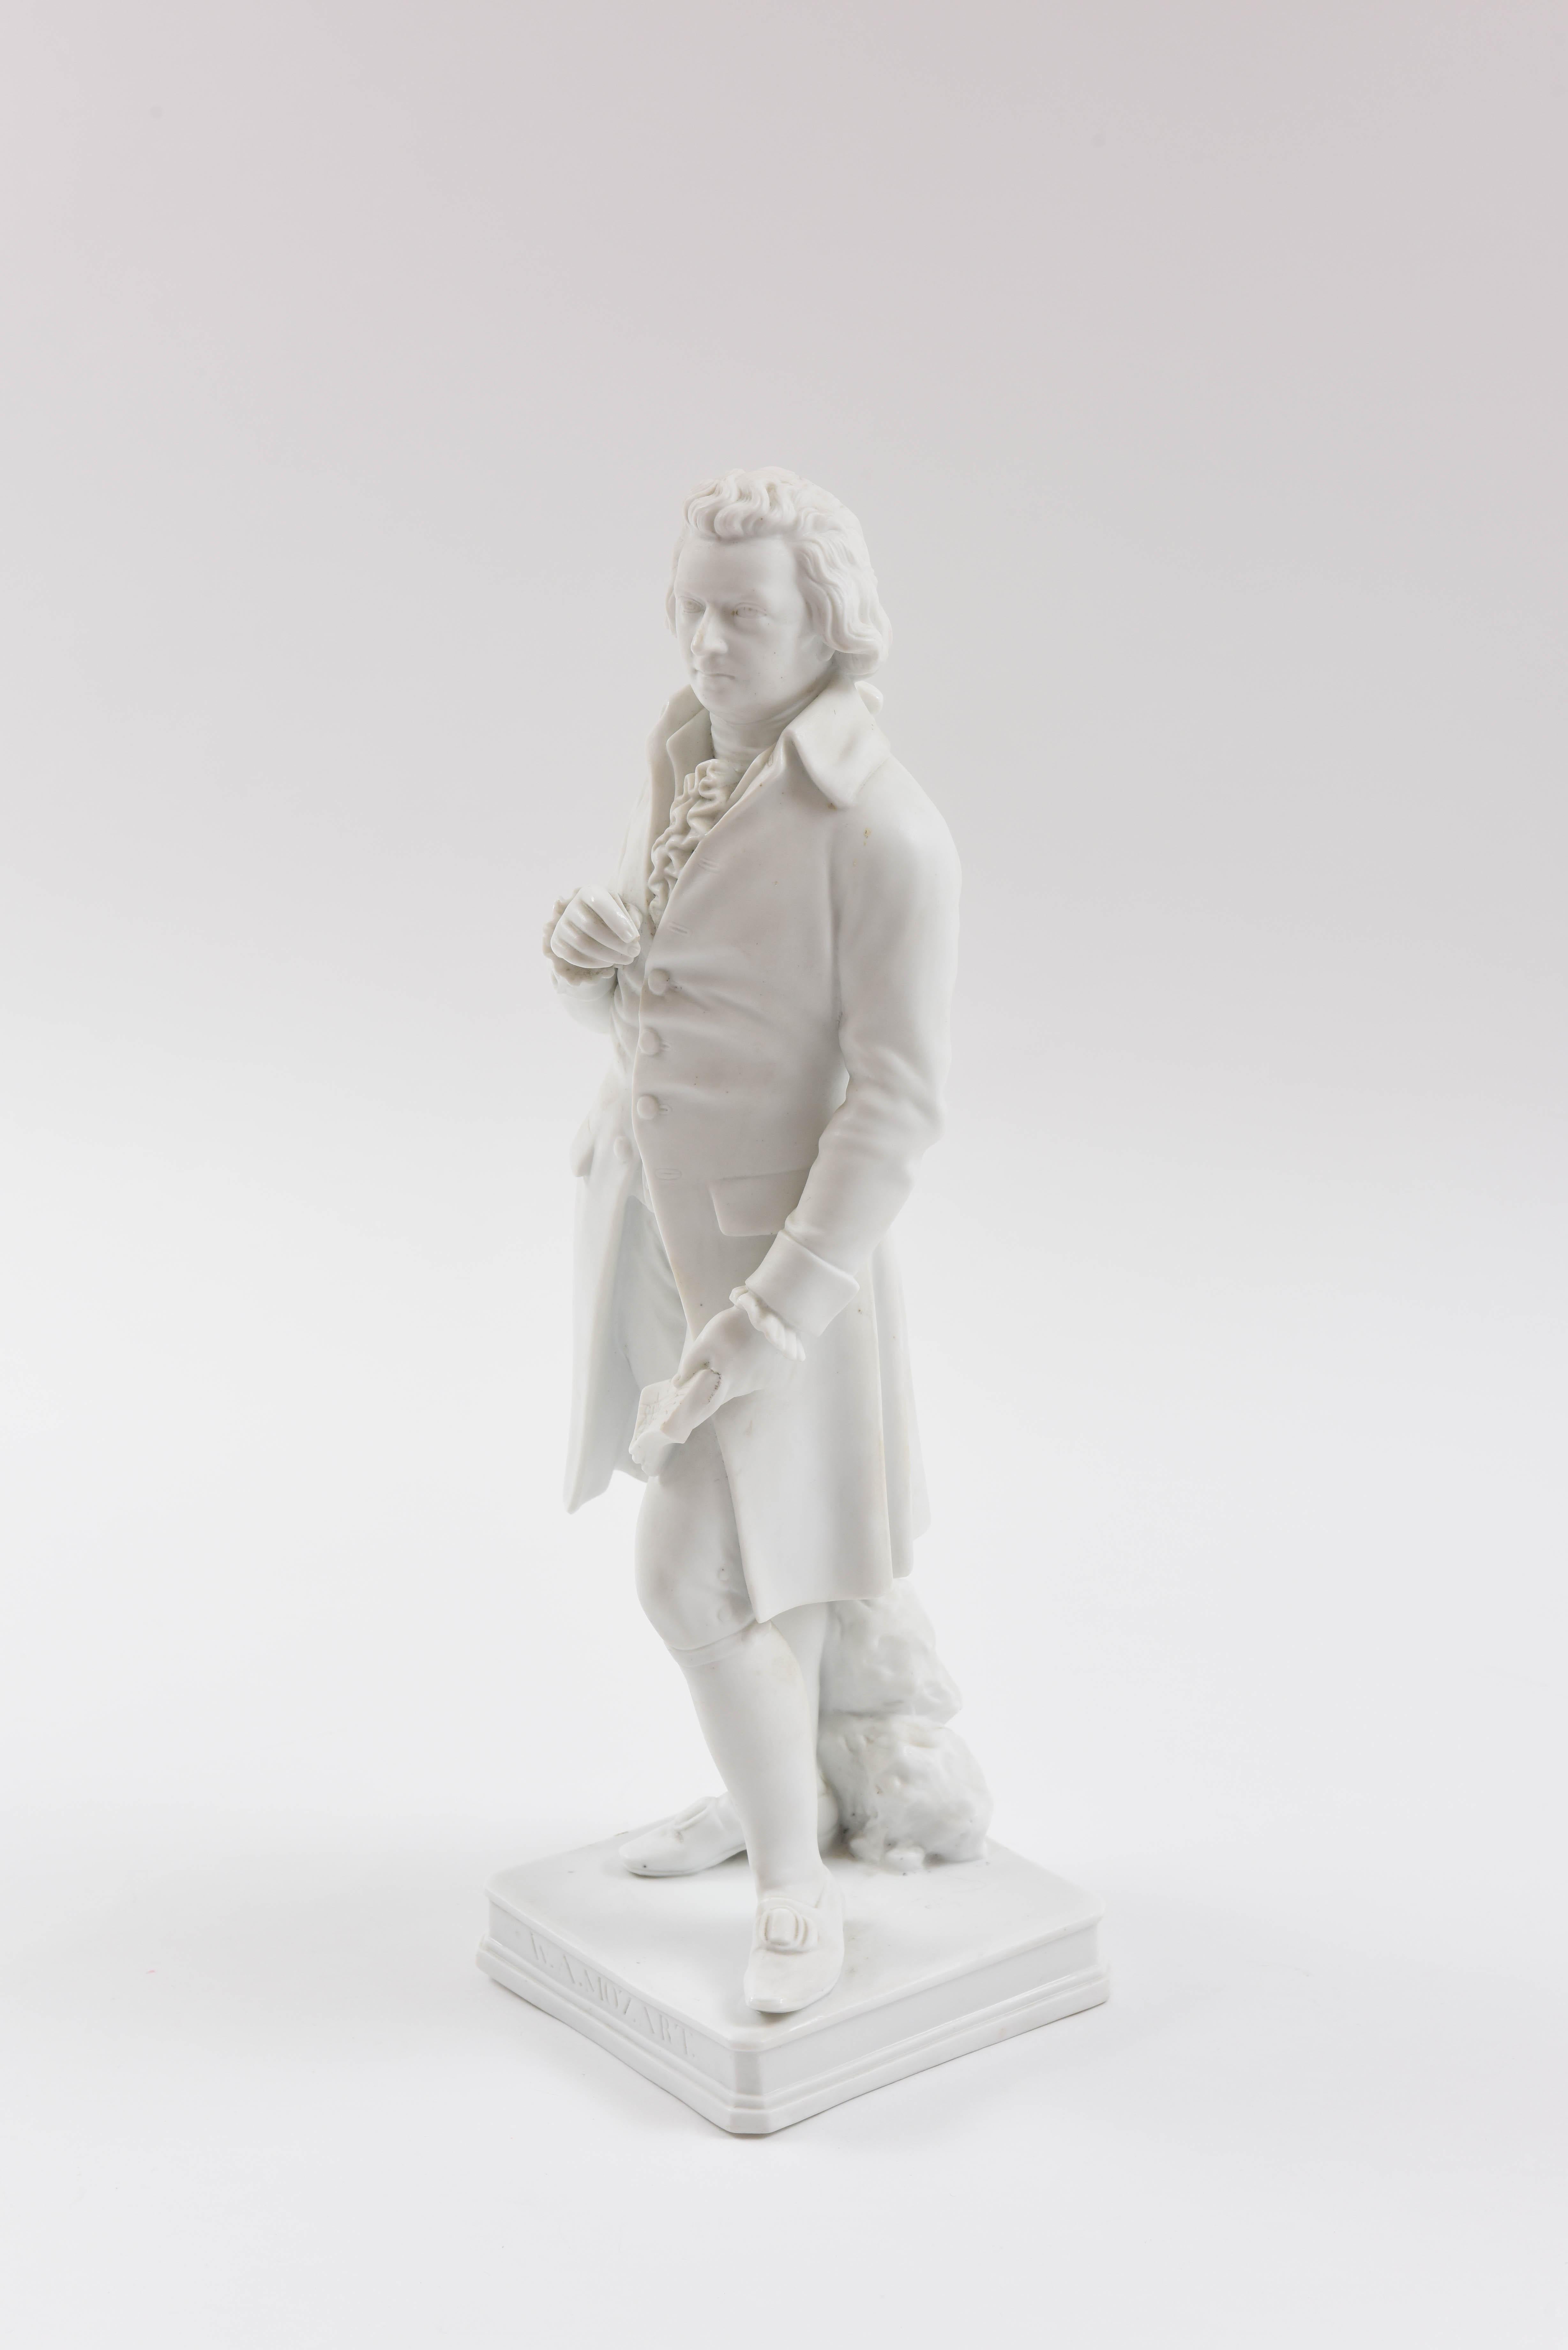 We couldn't resist this charming Parian porcelain sculpture of Mozart in full dress. In wonderful antique condition and clearly moulded with great attention to detail. A popular collectible during the 19th century as it allowed the English Porcelain